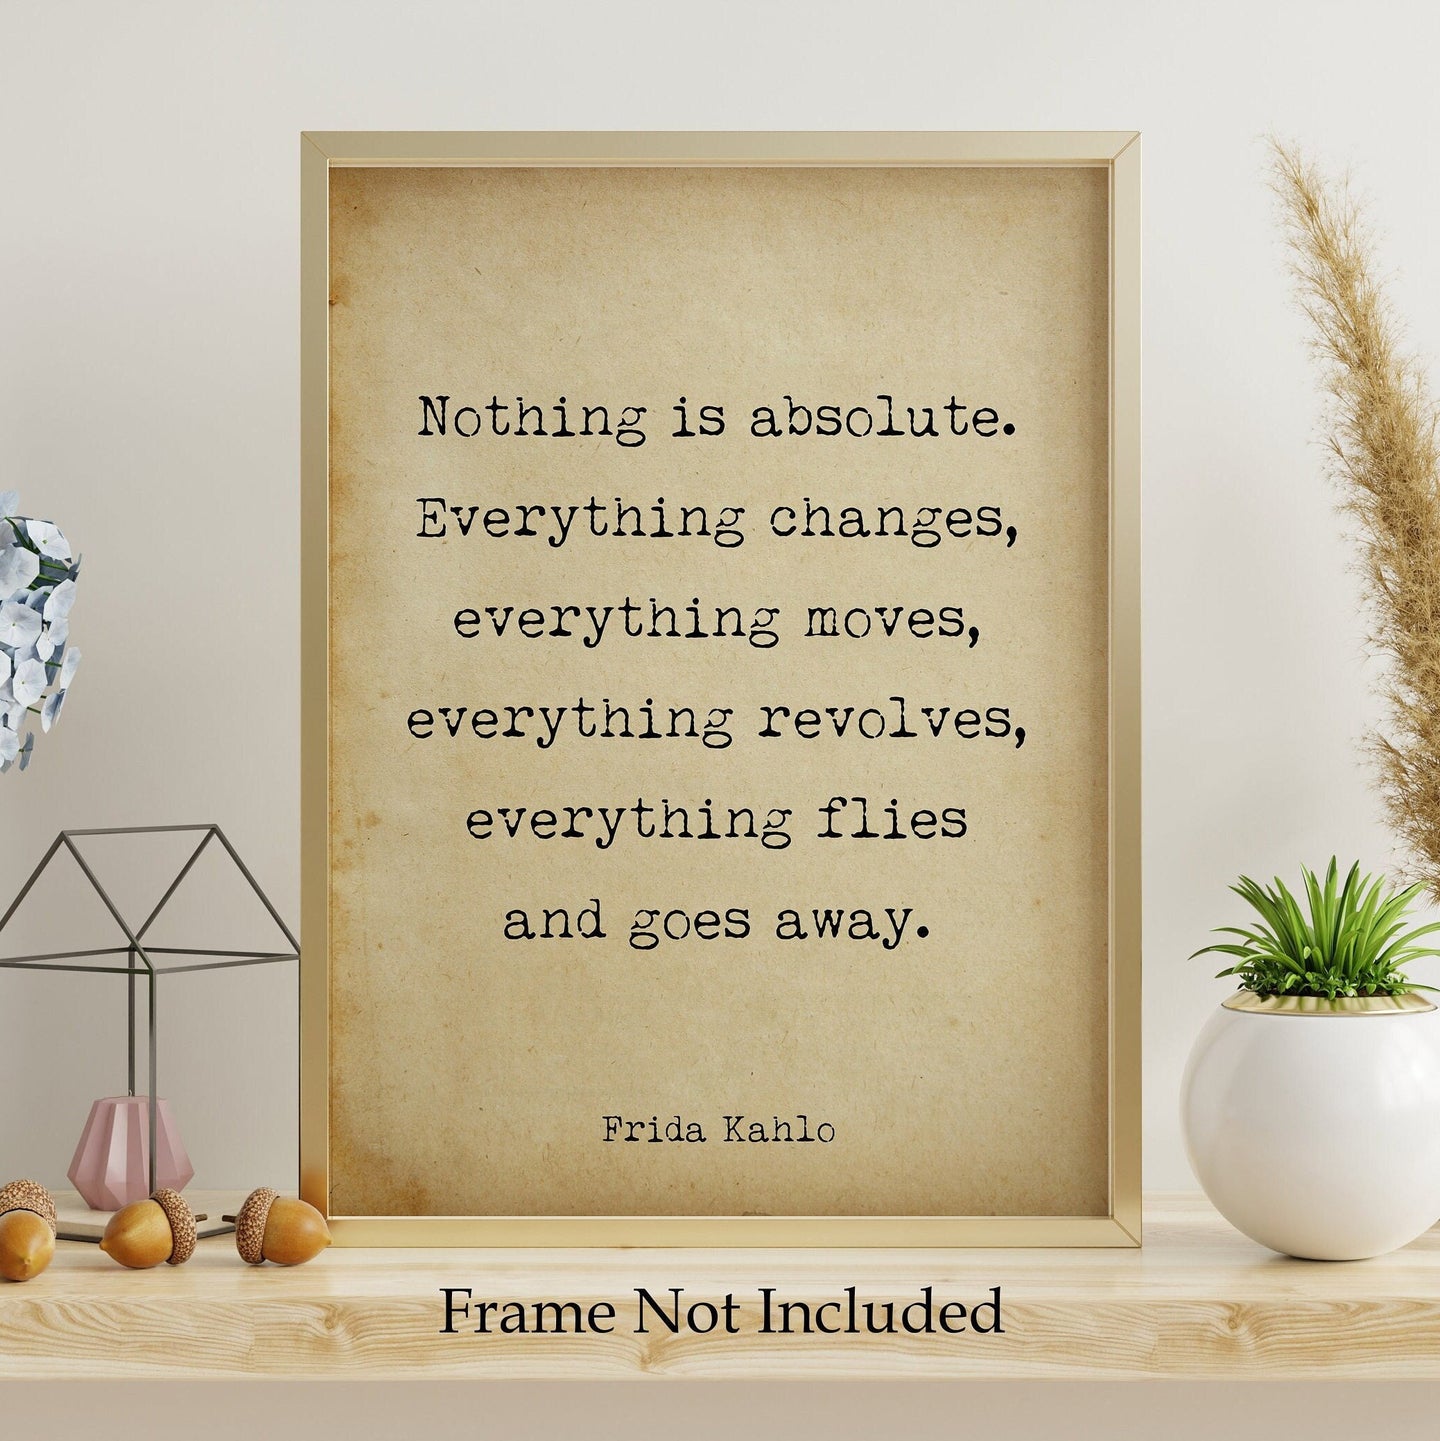 Frida Kahlo Print - Nothing is absolute. Everything changes - Frida Kahlo poster print - Artist Quote UNFRAMED